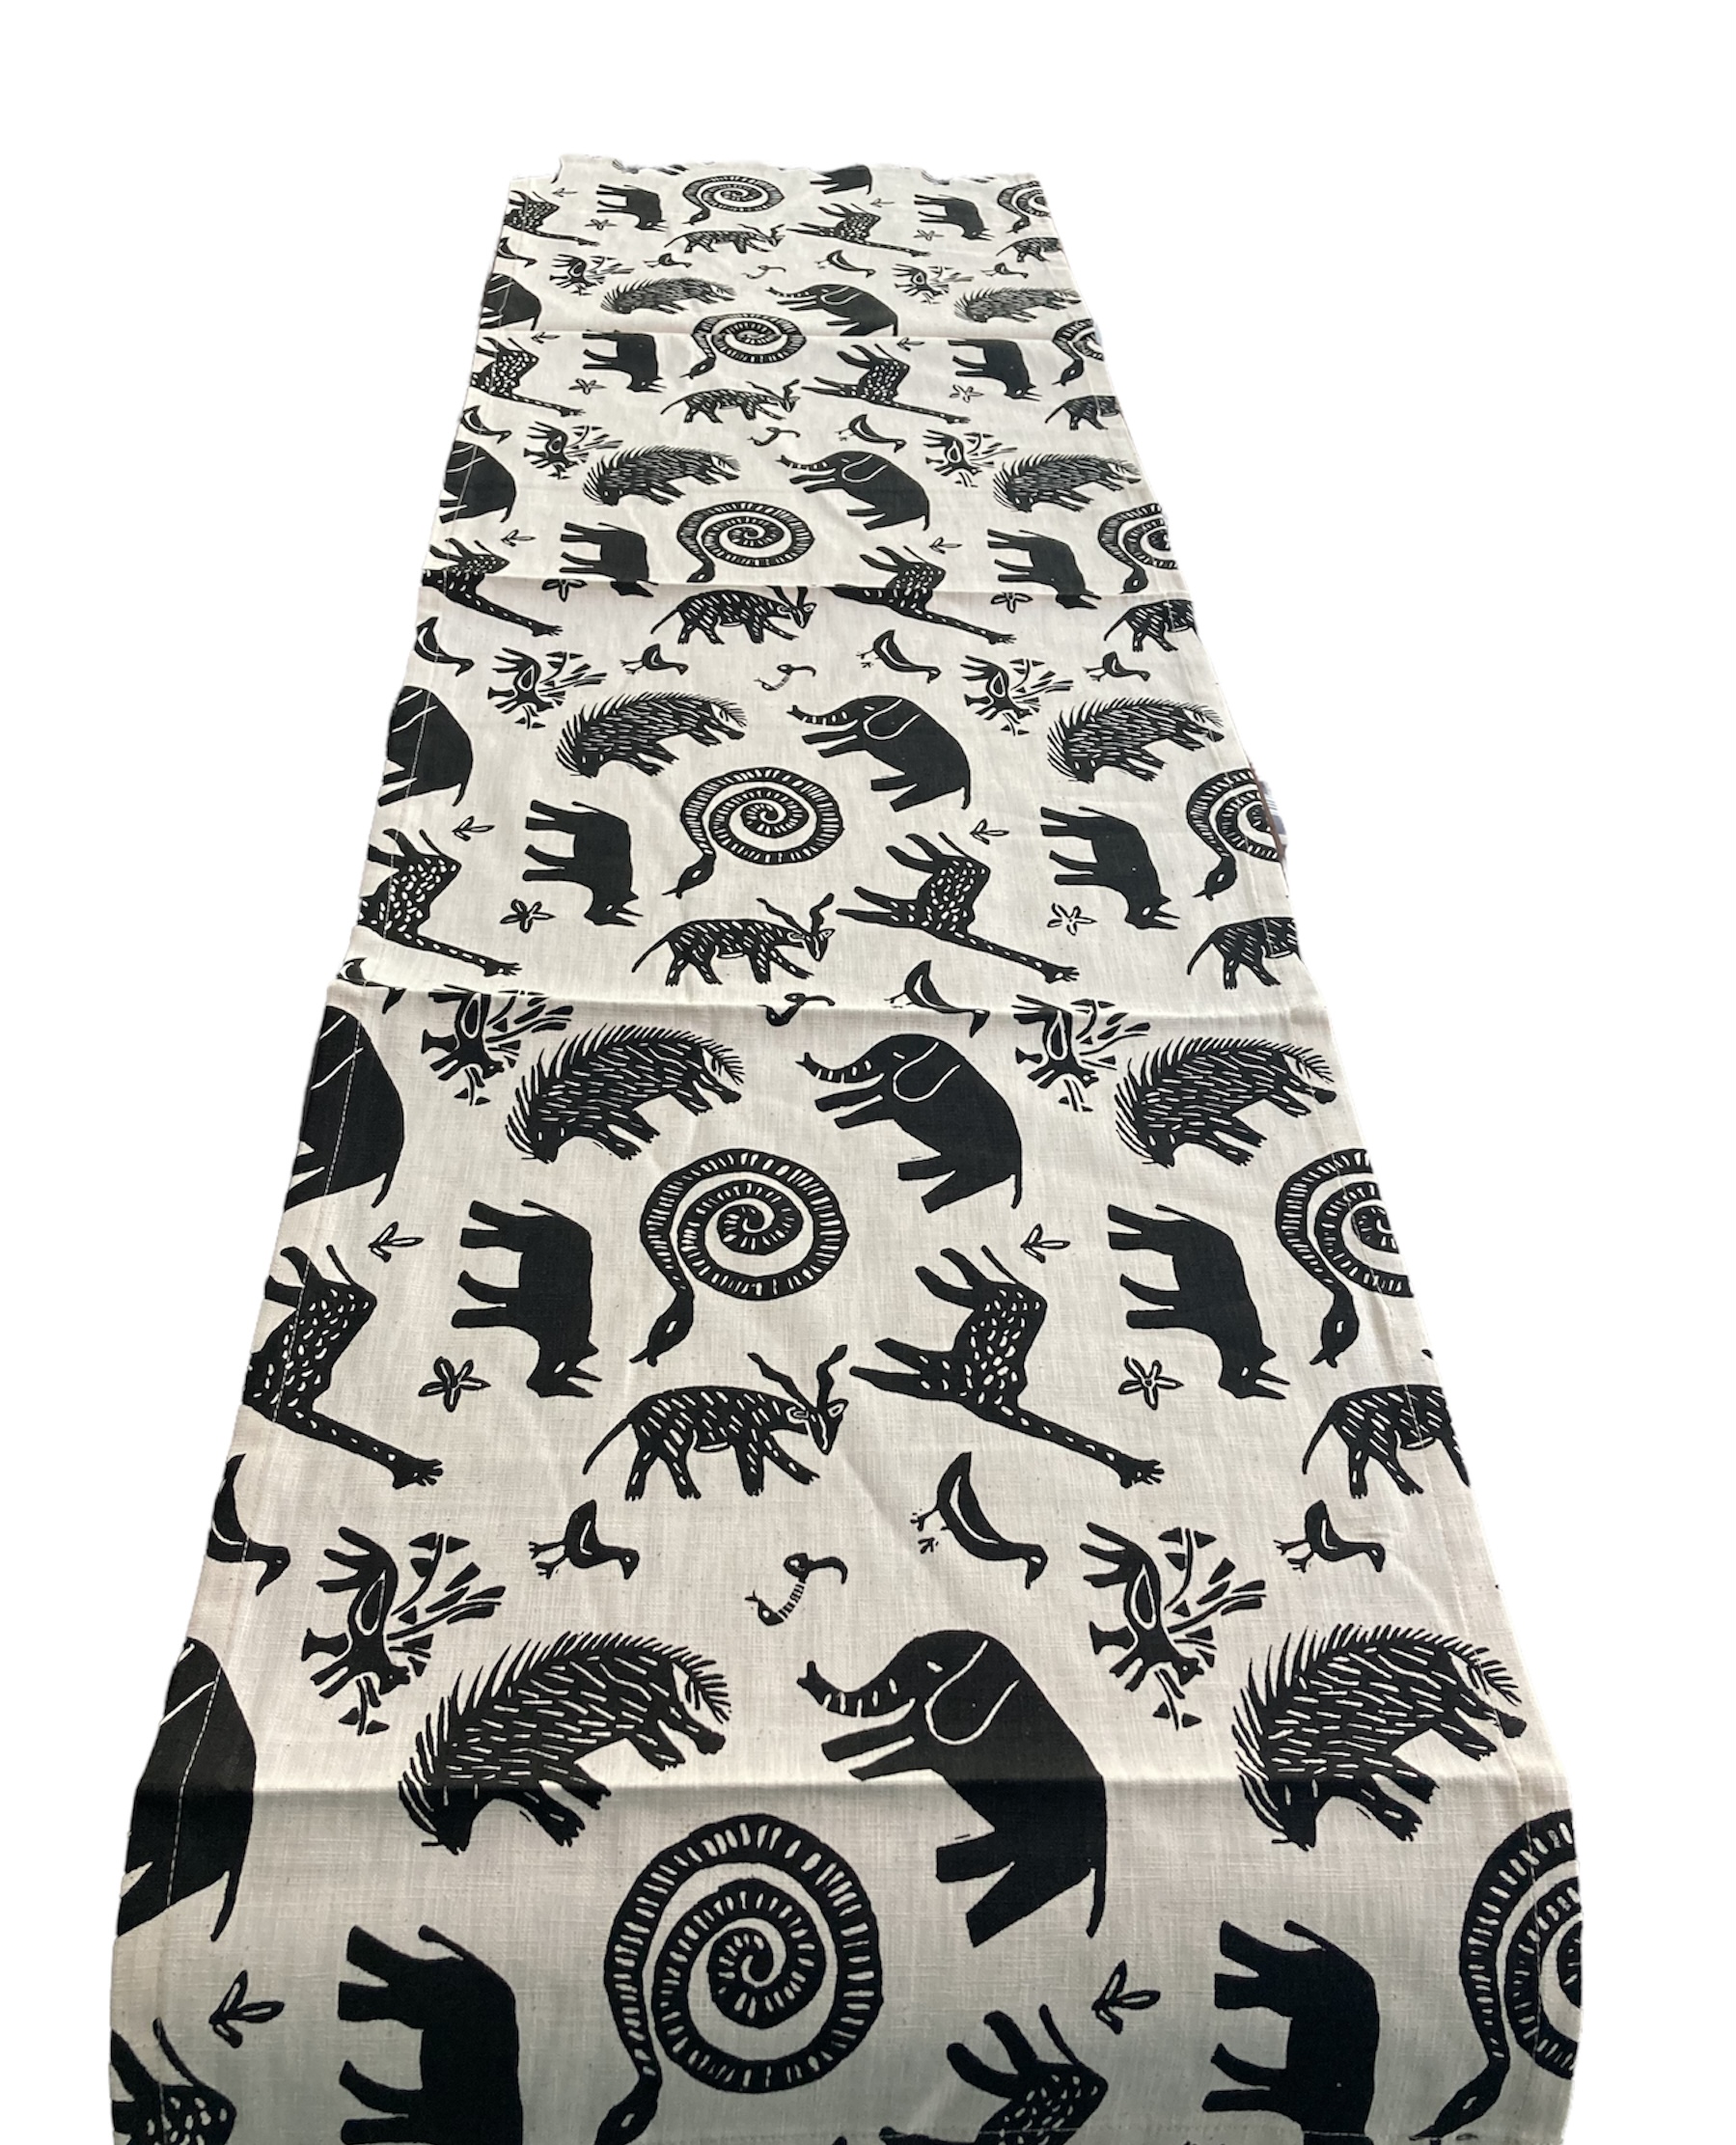 100% cotton Table Runner 96\" x 16\" from Namibia - Design bw03l